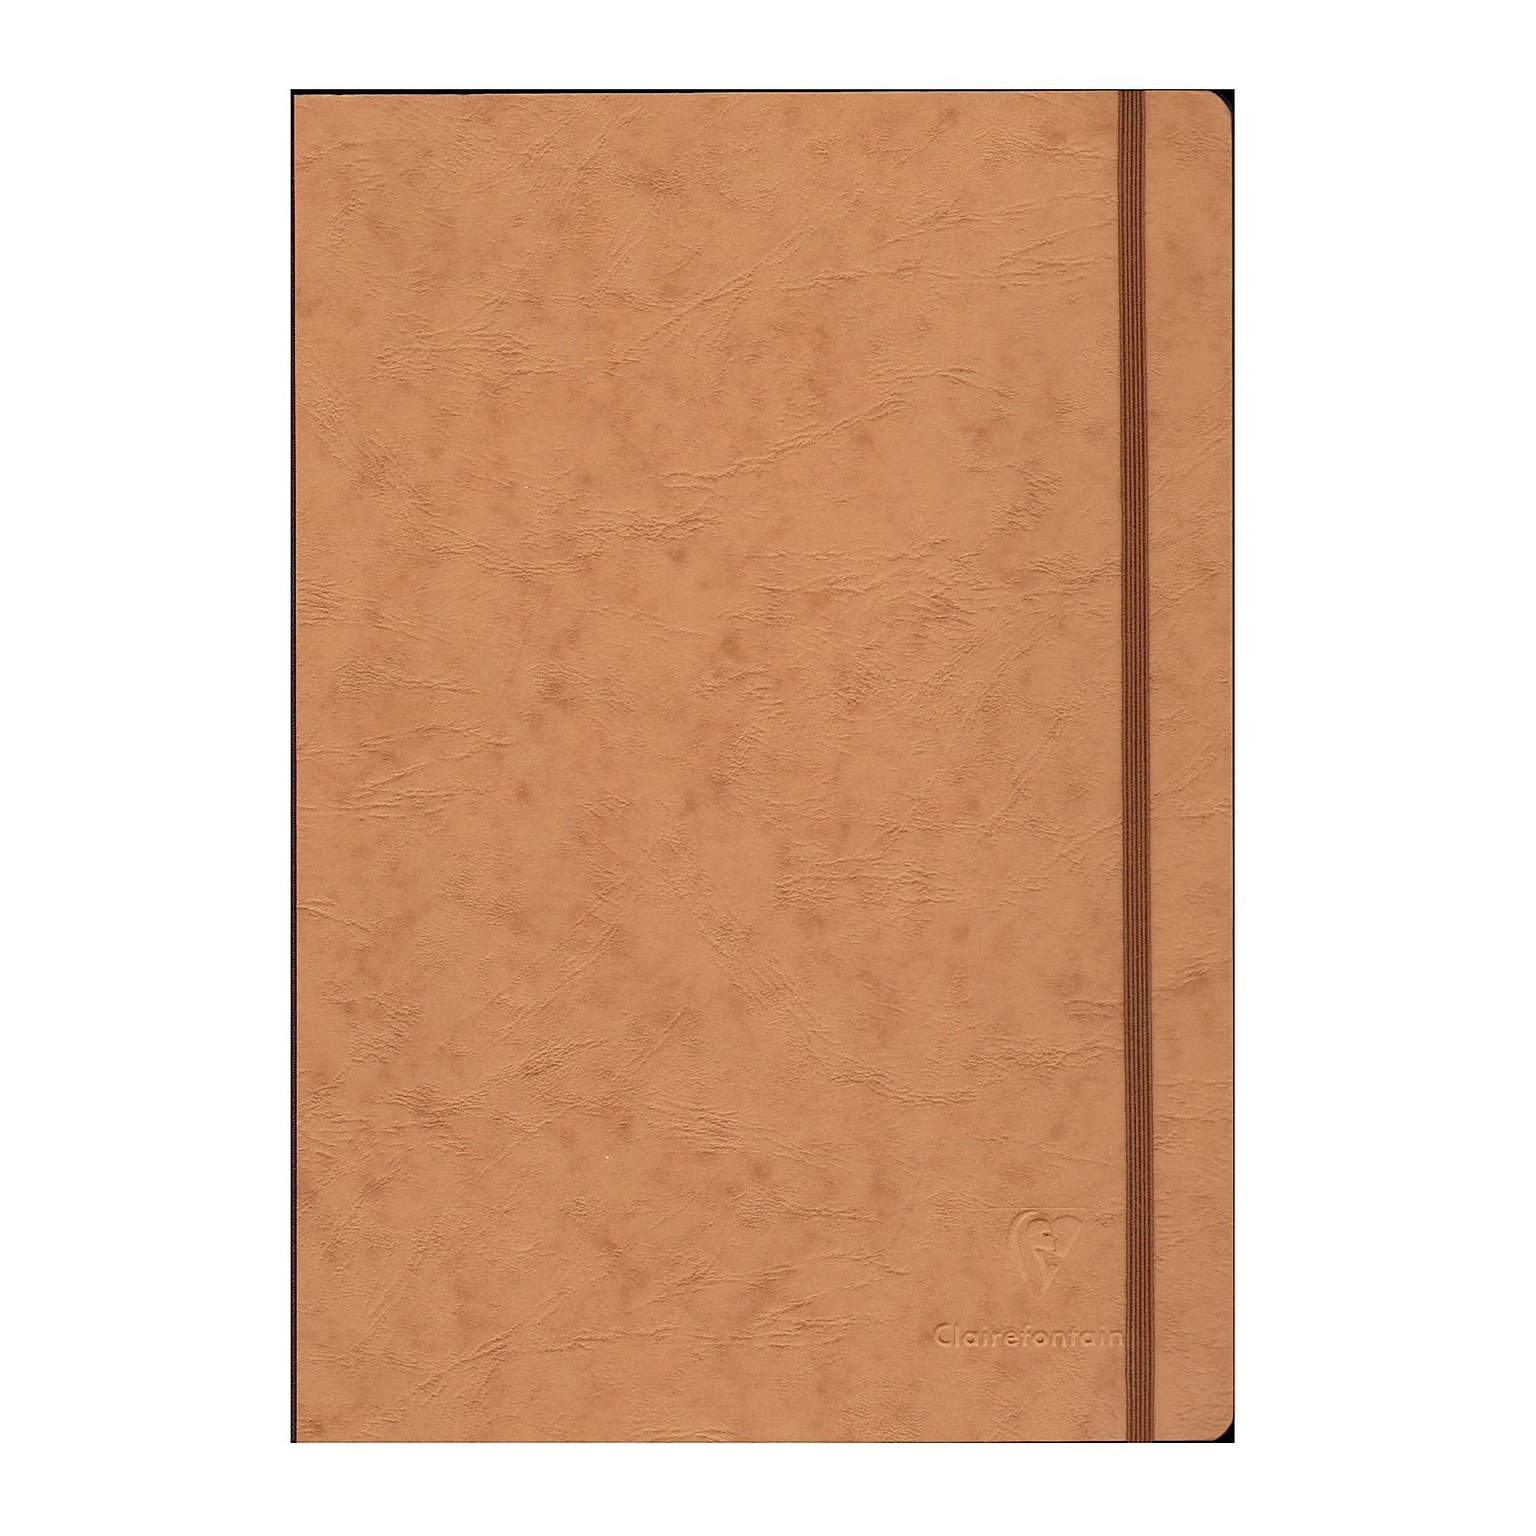 Clairefontaine Cloth-Bound Notebooks 8 1/4 In. X 11 3/4 In. Ruled, Tan Cover, Elastic Closure 96 Sheets [Pack Of 2] (2PK-79146)